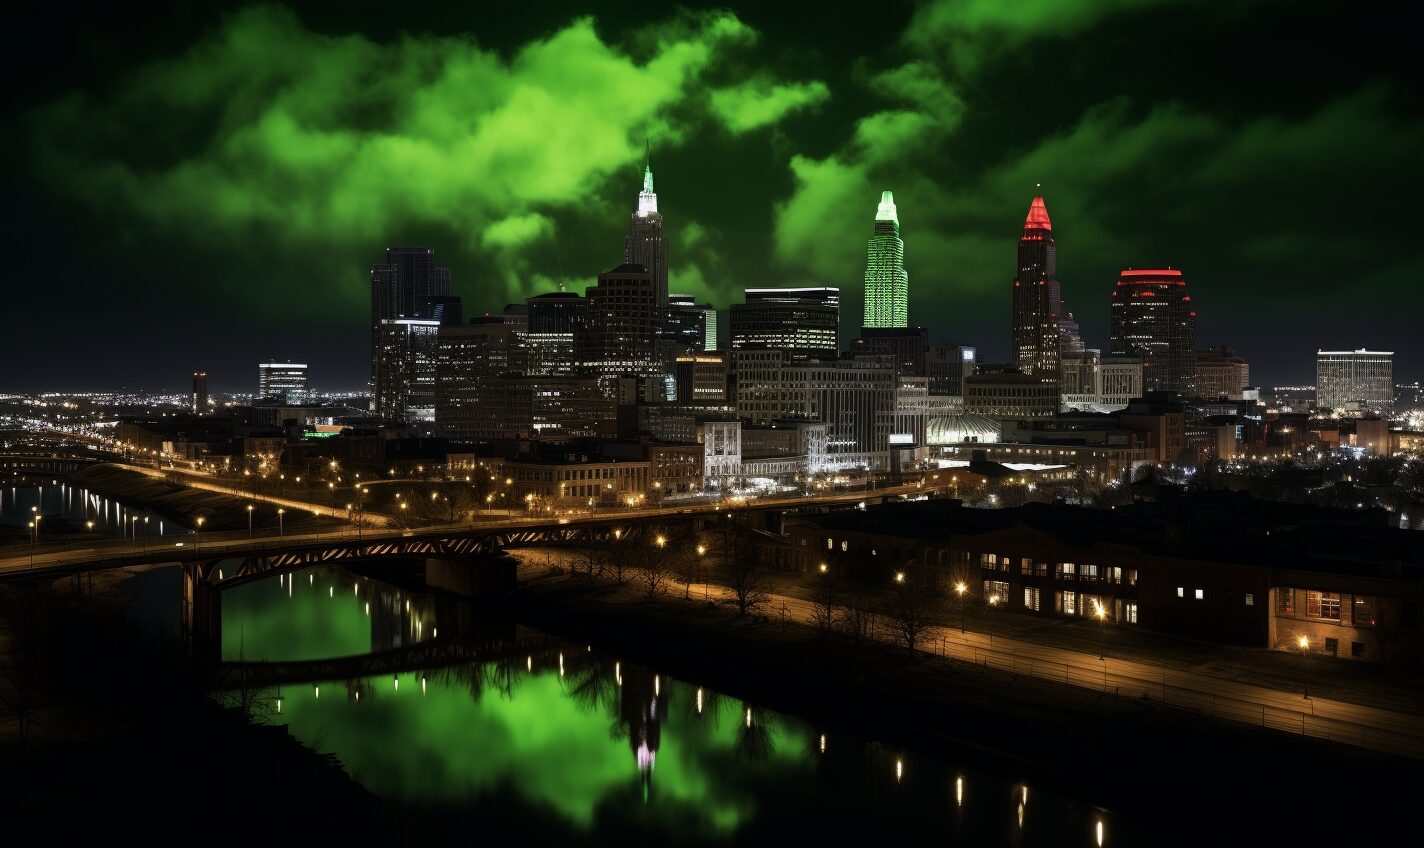 cleveland, ohio in a black and neon green glow